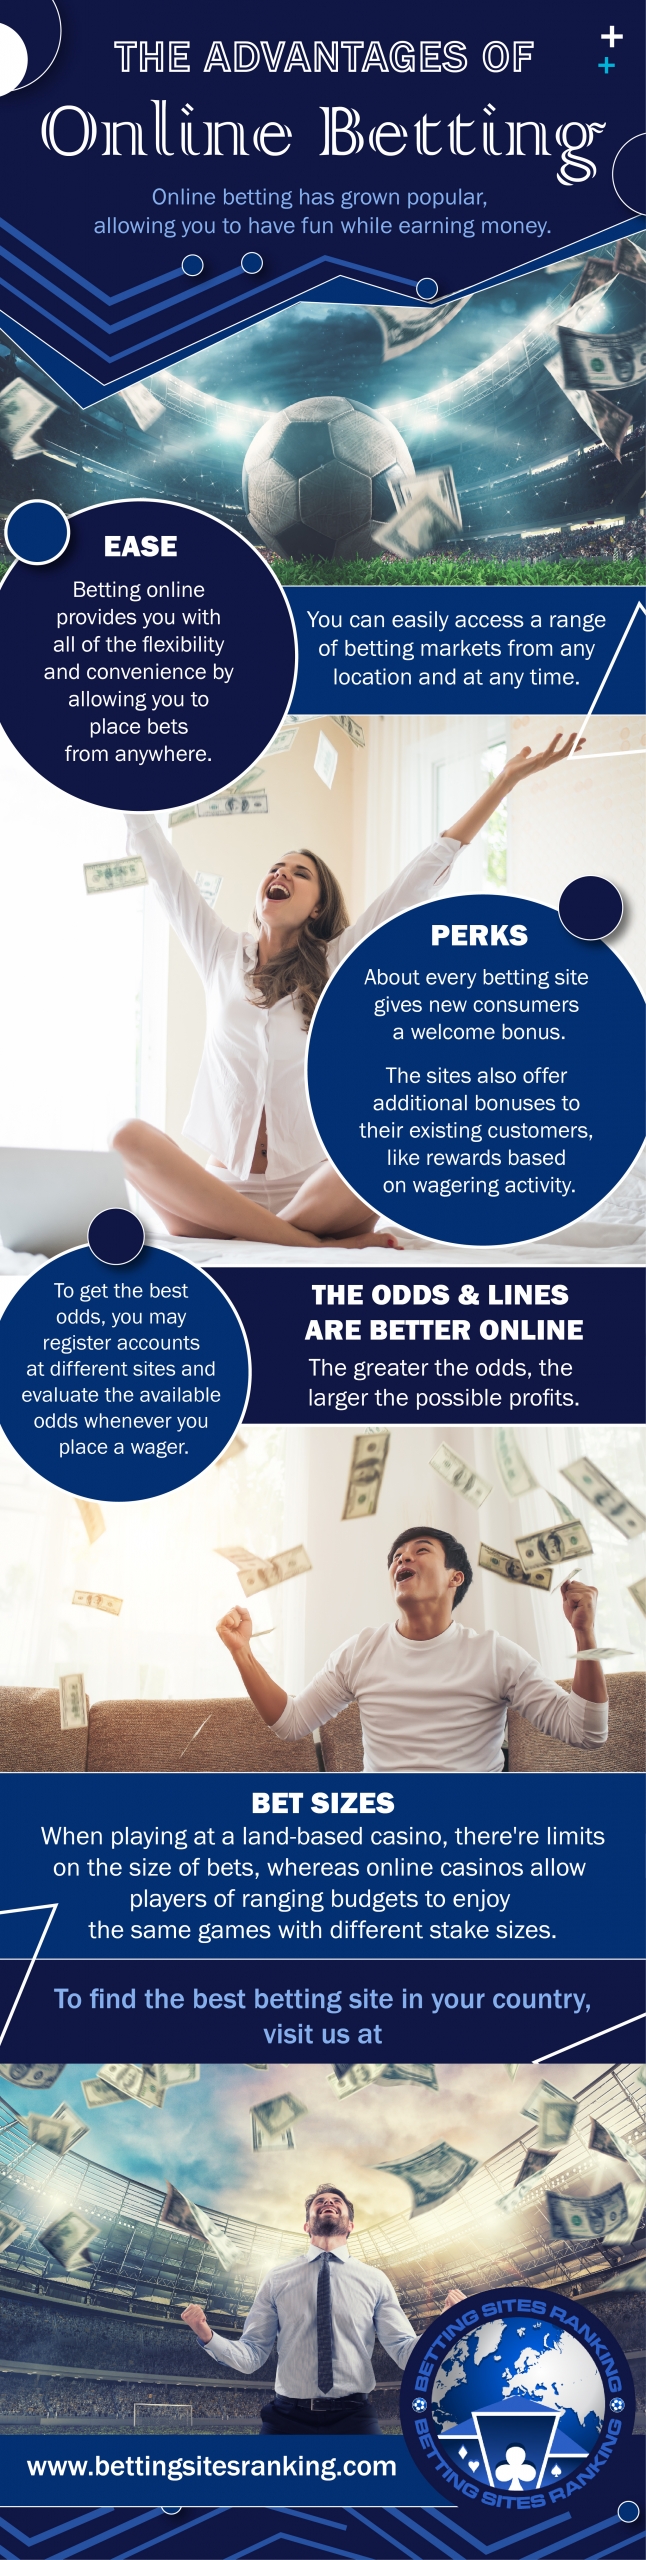 The-Advantages-Of-Online-Betting